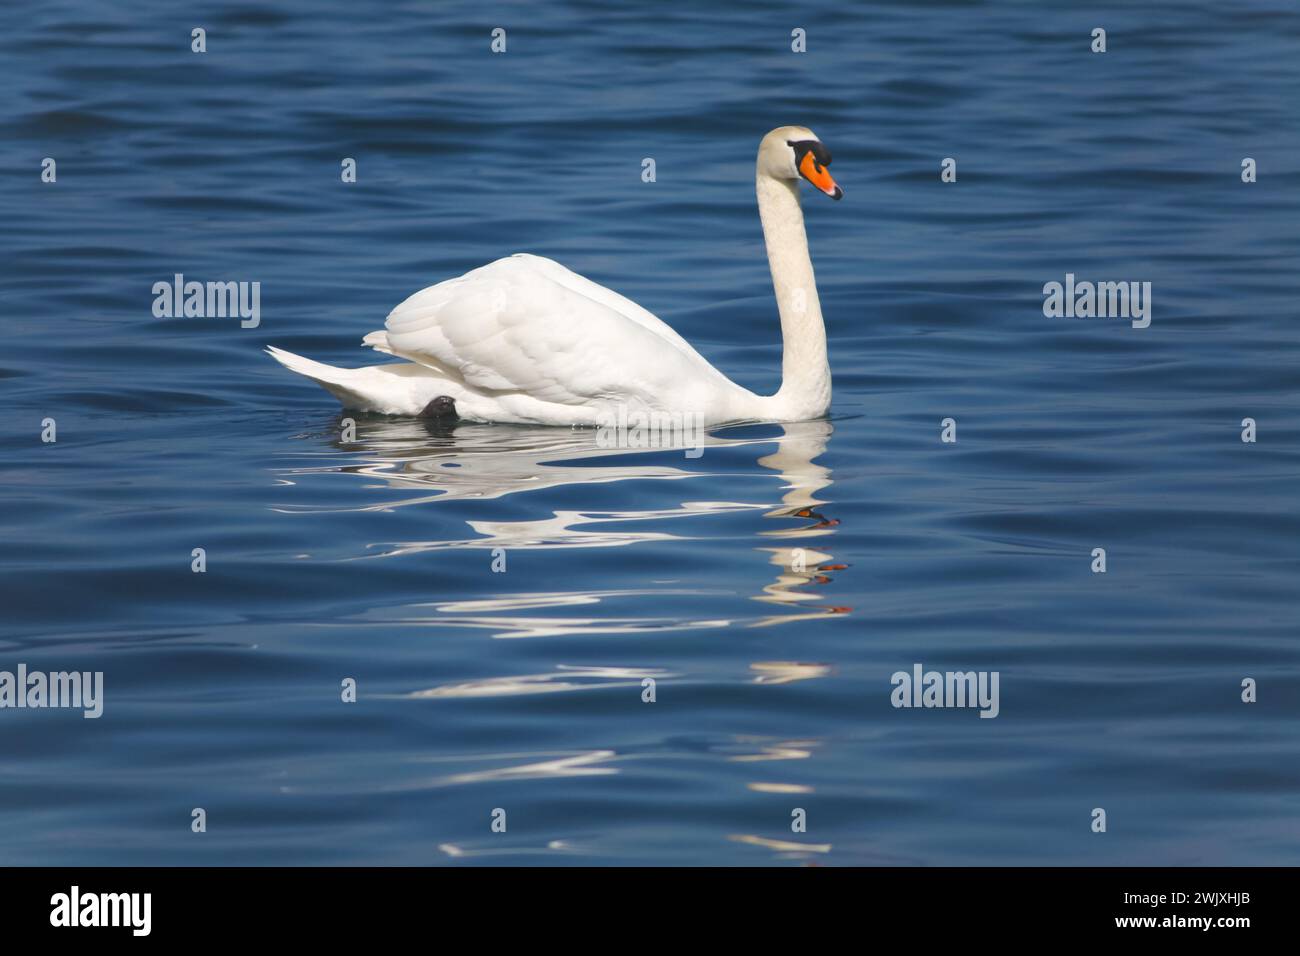 graceful white swan swimming serenely on a calm lake, reflecting the sunlight on its lush feathers Stock Photo